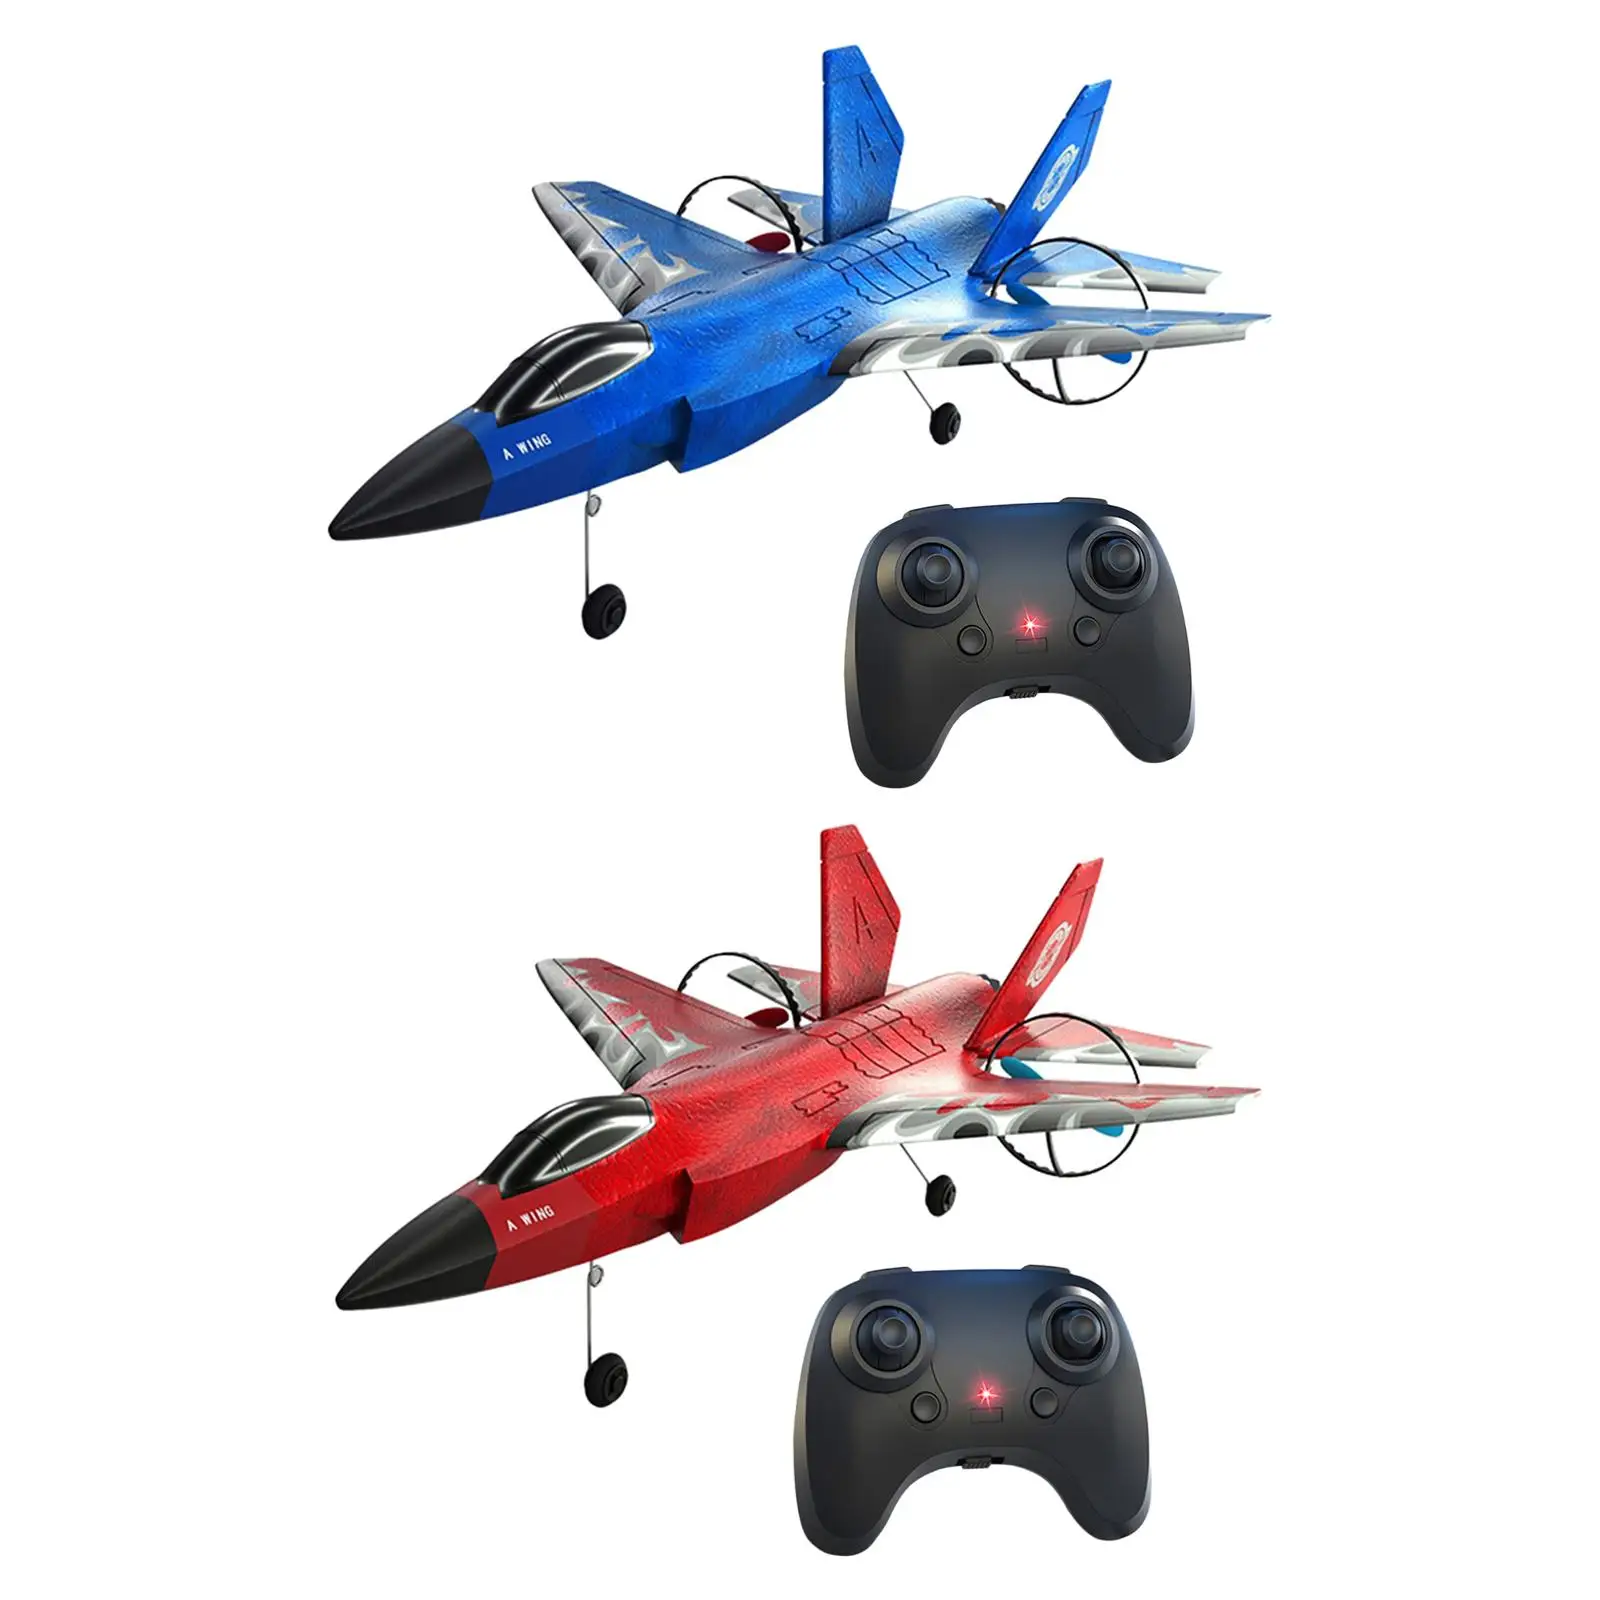 RC Glider Aircraft Lightweight Portable Gift RC Aircraft Foam RC Airplane Remote Control Jet Airplane for Adults Boys Girls Kids